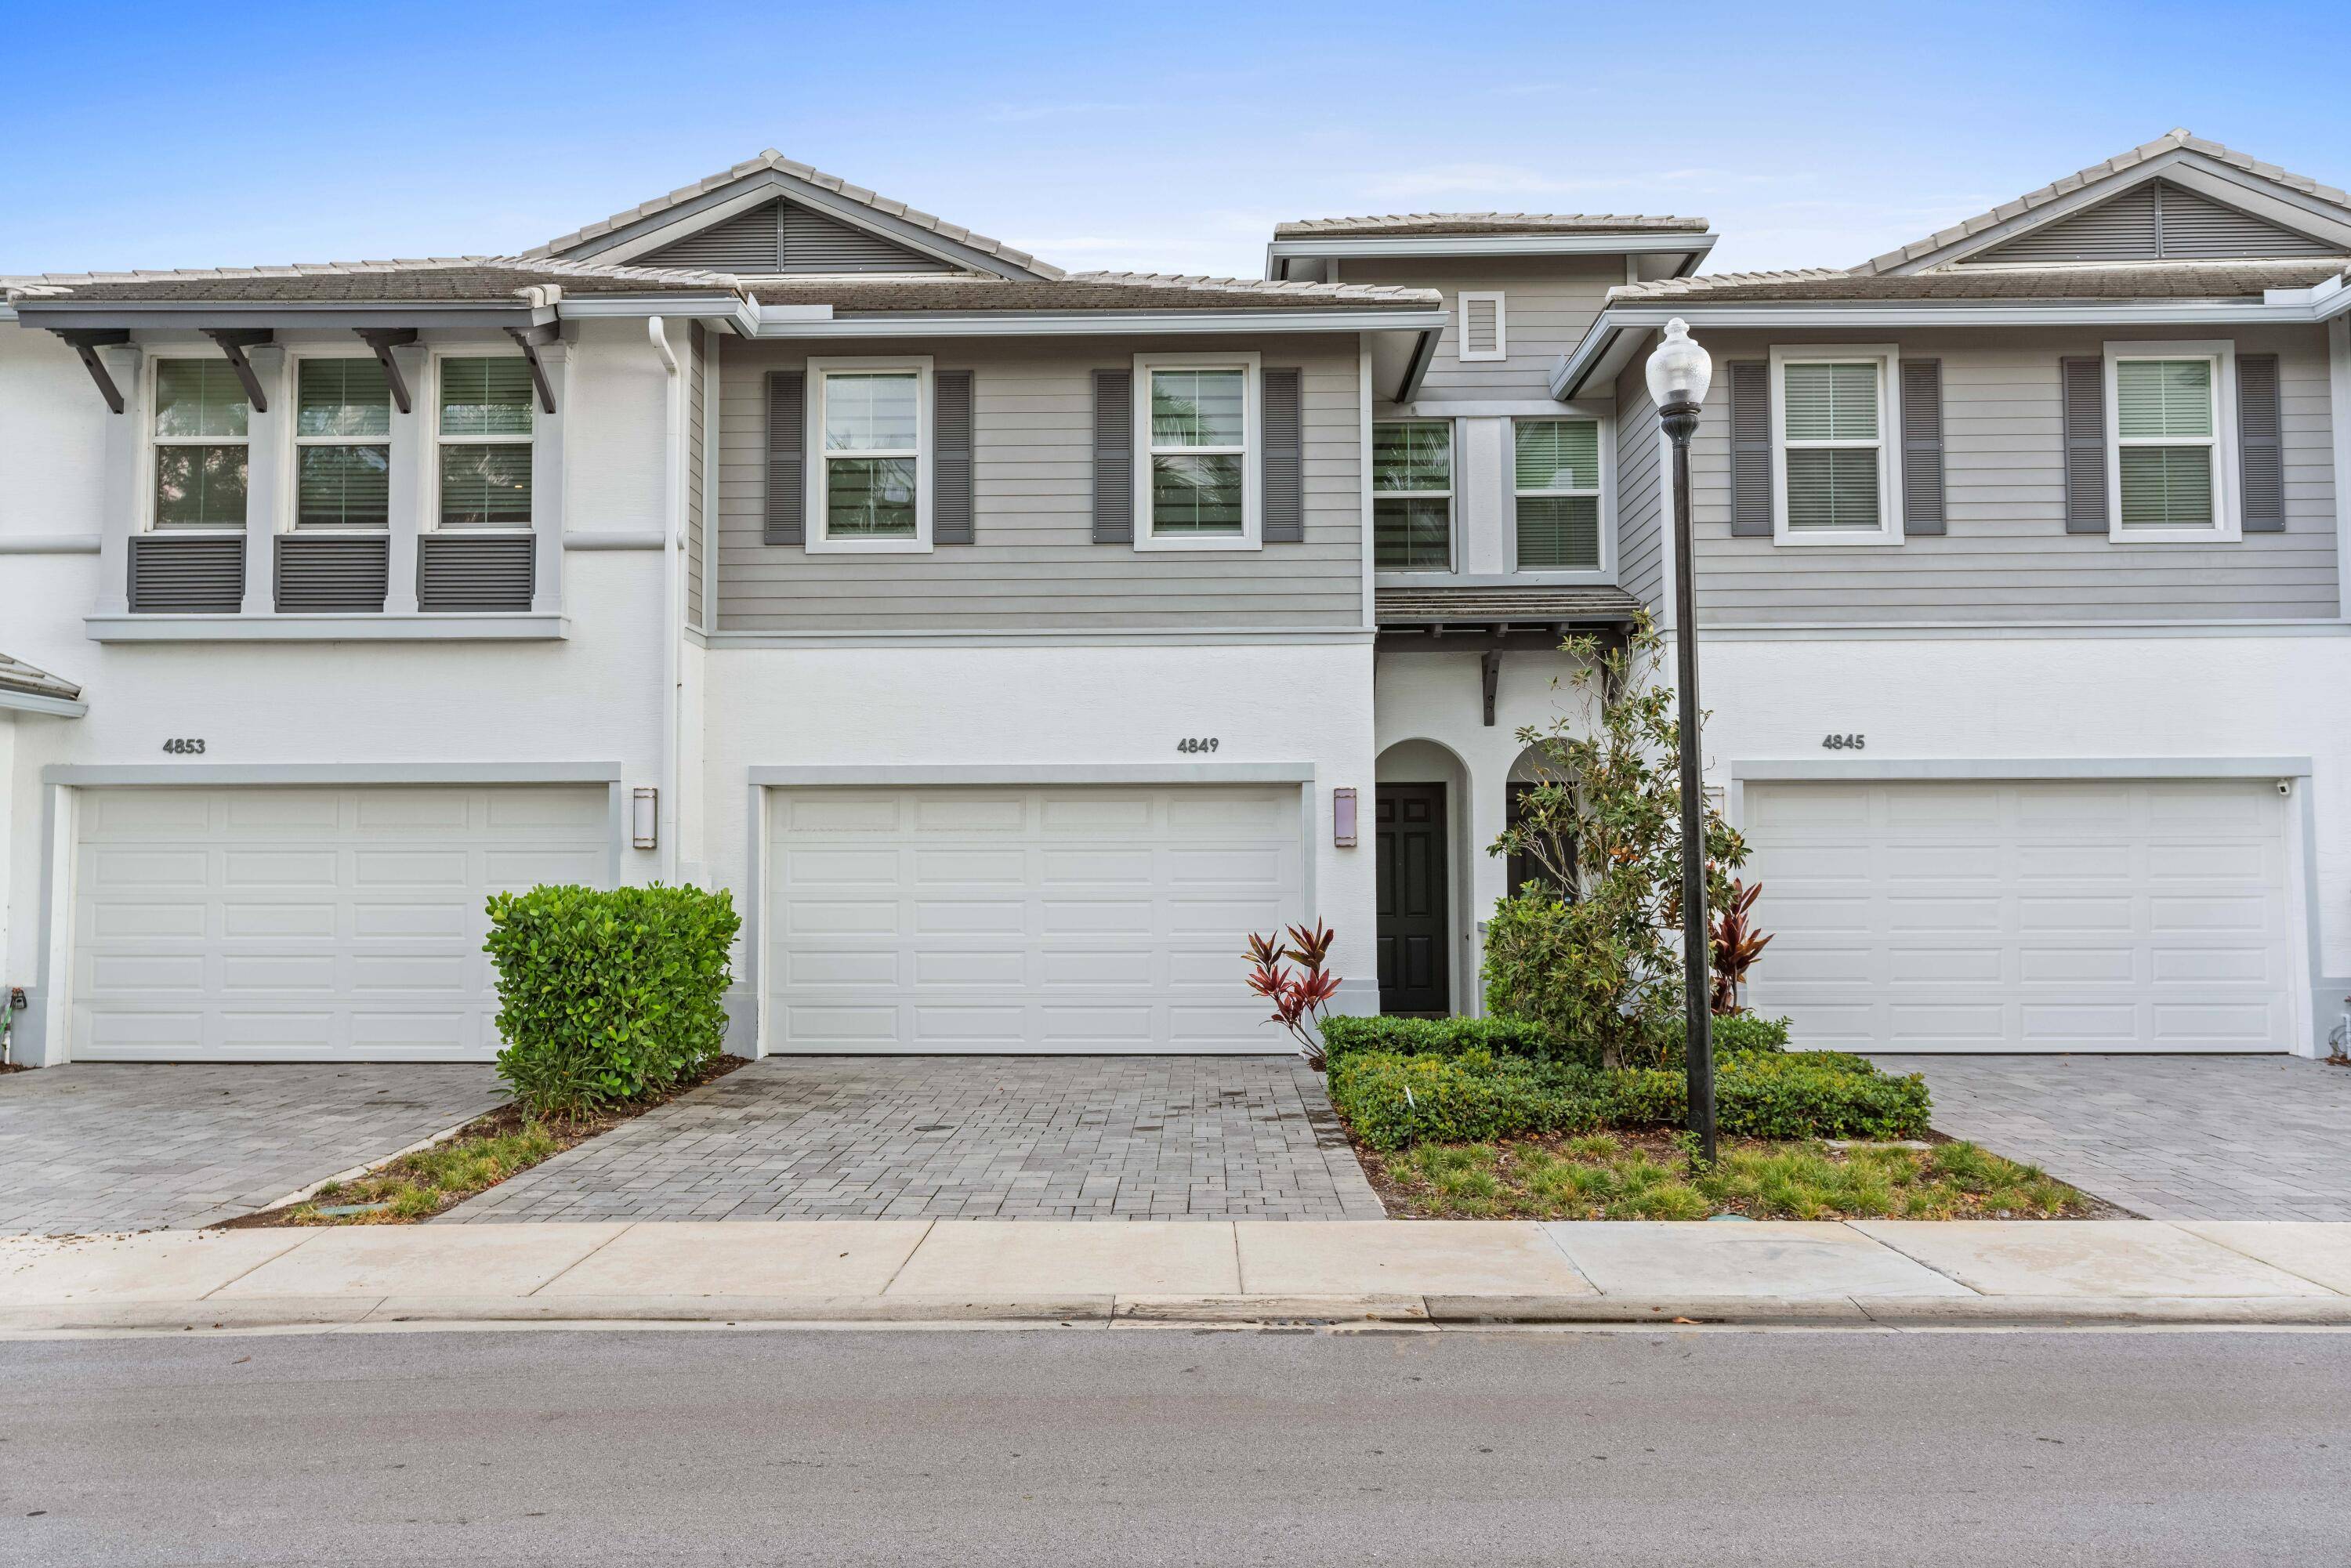 Welcome to Pointe Midtown a townhome community centrally located in the heart of The Palm Beaches.